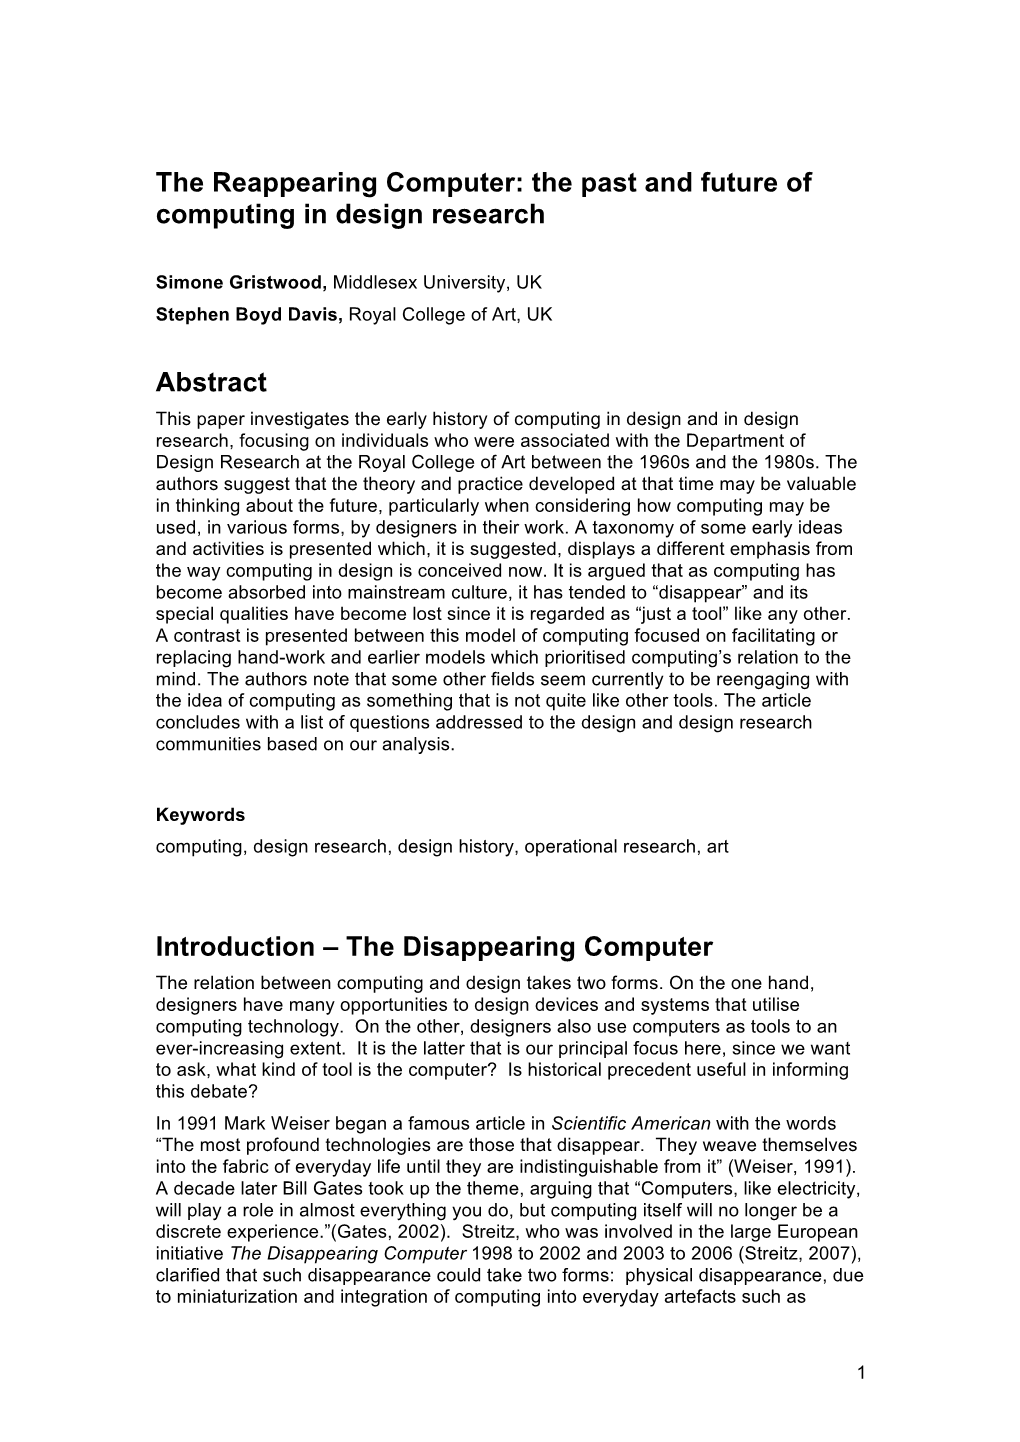 The Reappearing Computer: the Past and Future of Computing in Design Research